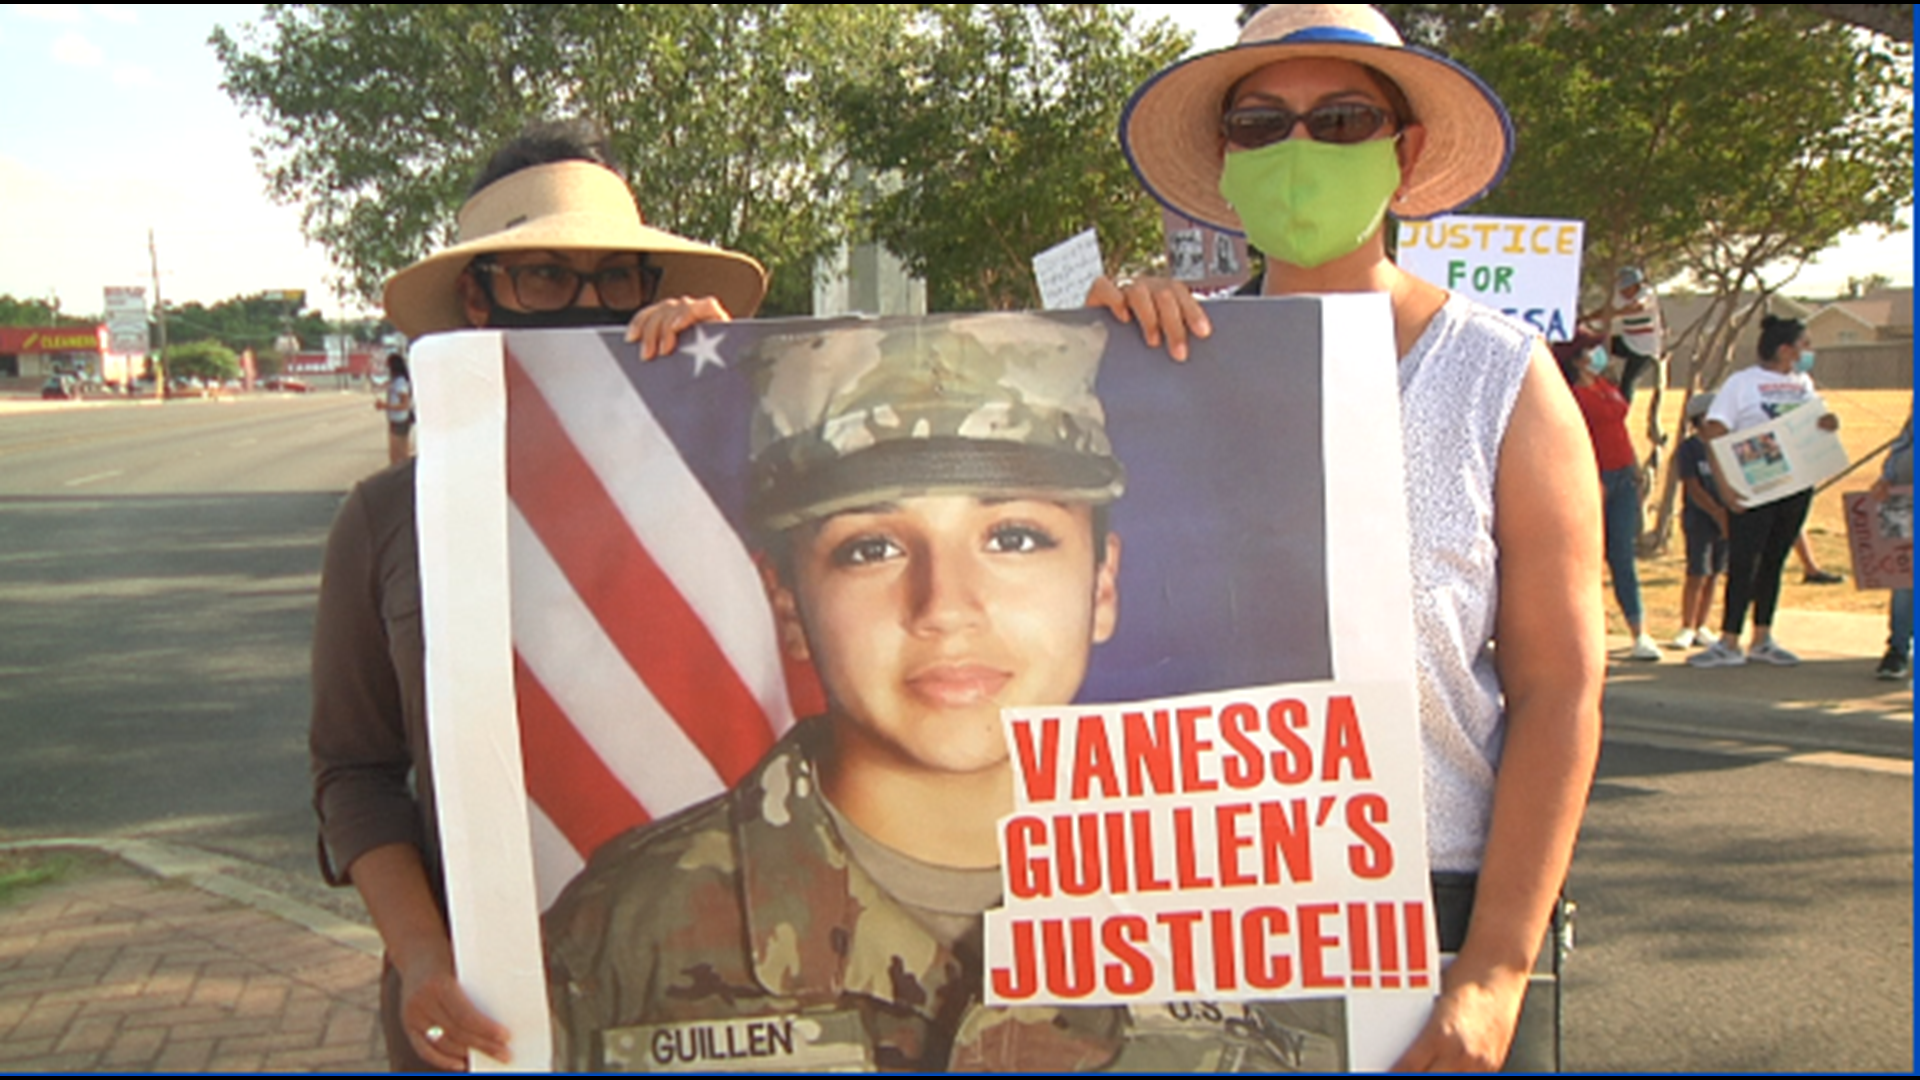 LULAC organized the protest Friday to demand answers in the Guillen case, as well as rally around other soldiers impacted by sexual harassment.